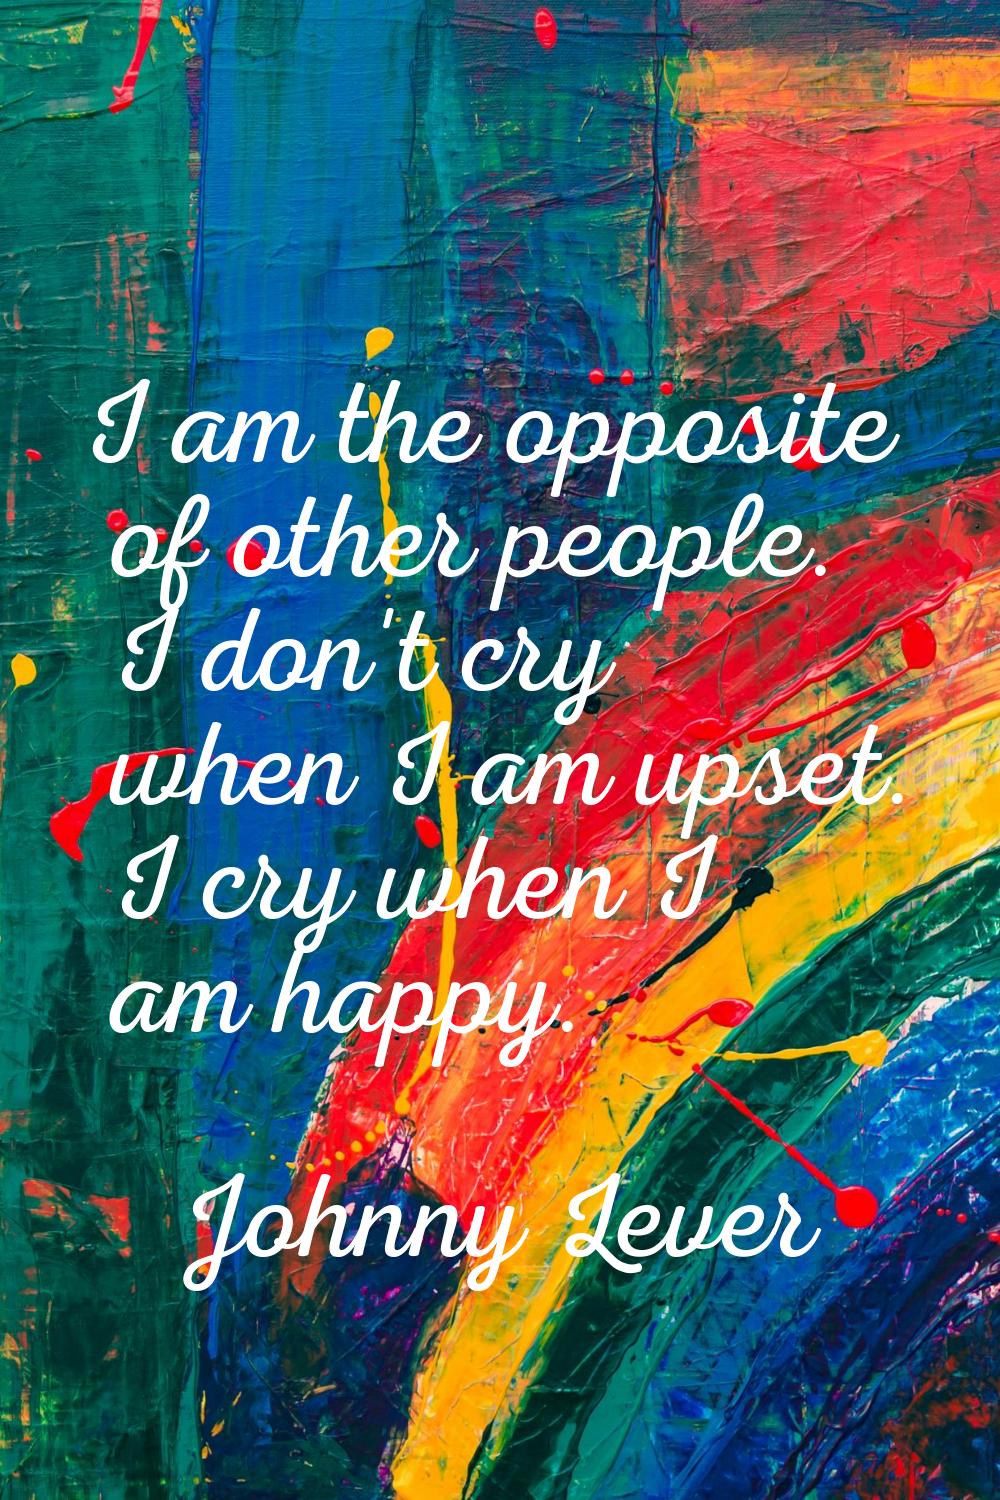 I am the opposite of other people. I don't cry when I am upset. I cry when I am happy.